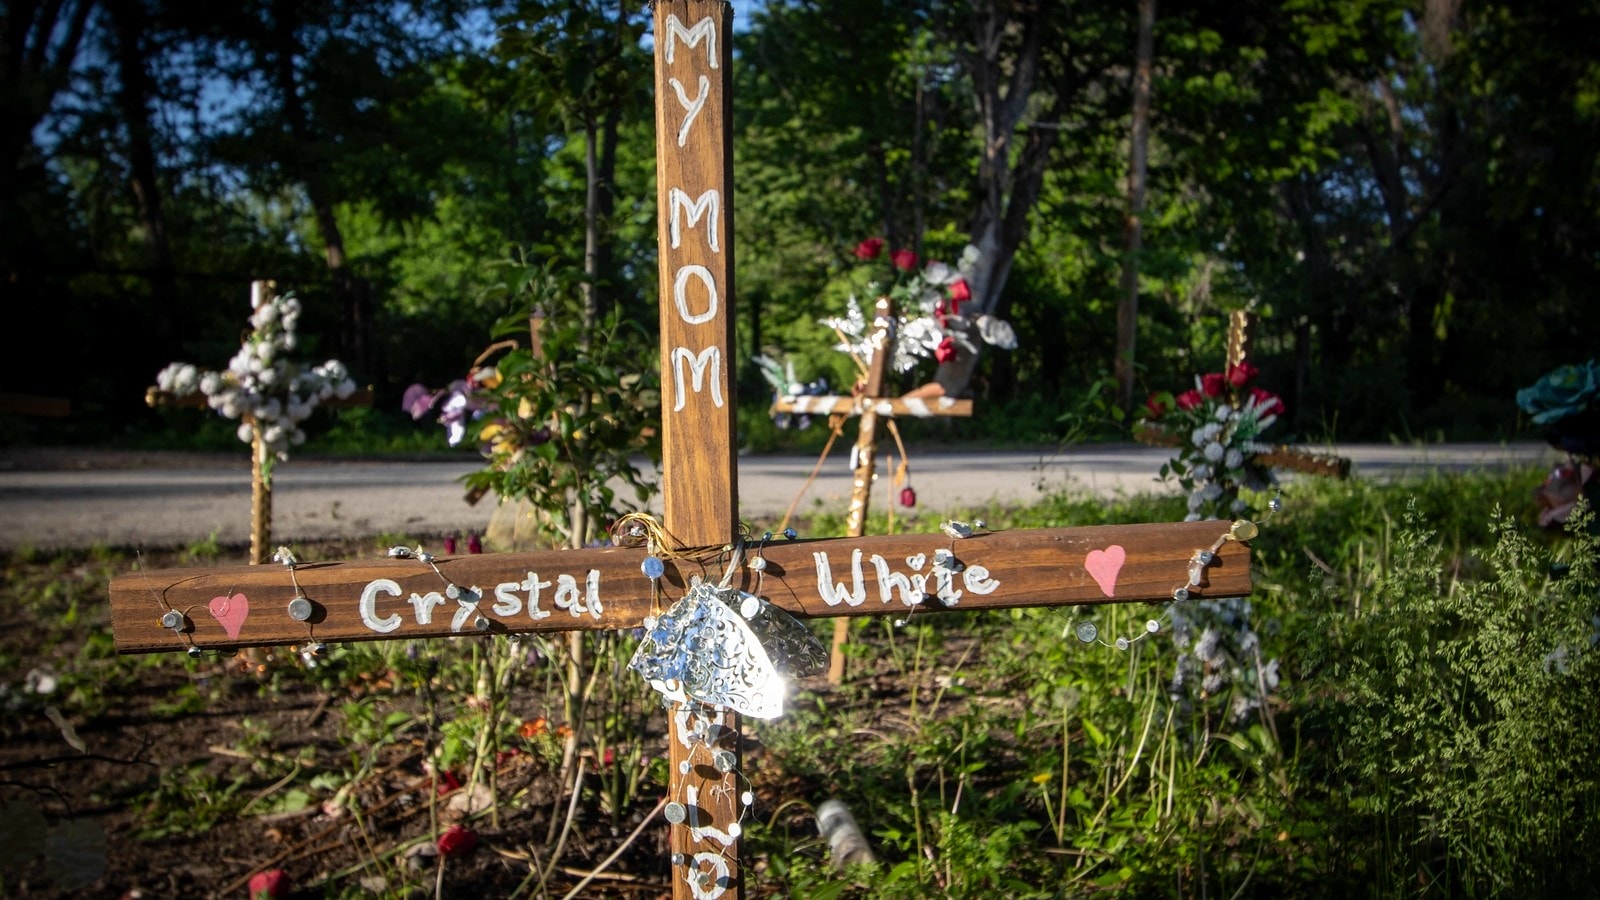 A memorial for Crystal White, a former resident of Lawrence's sanctioned camp who died there.